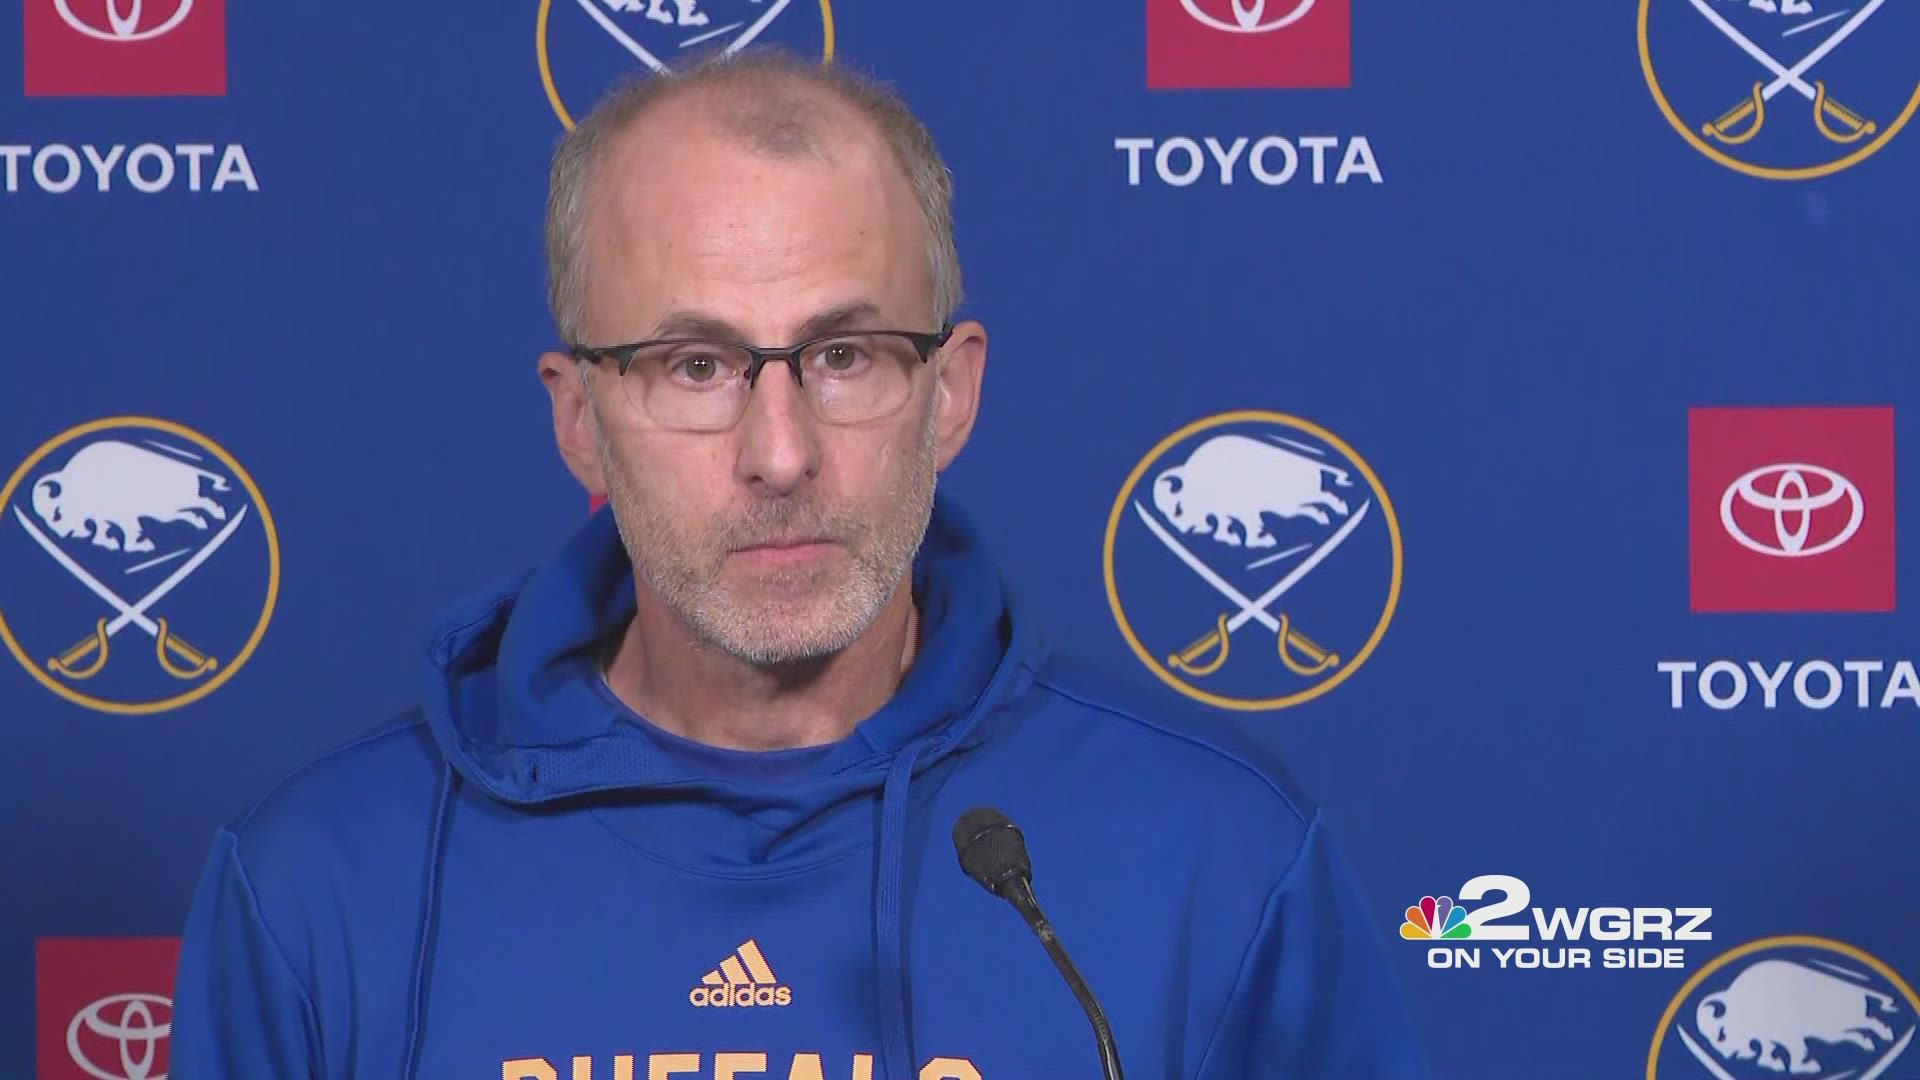 The Buffalo Sabres signed coach Don Granato to a two-year contract extension on Wednesday, rewarding him for the team's improvement in his first full season.